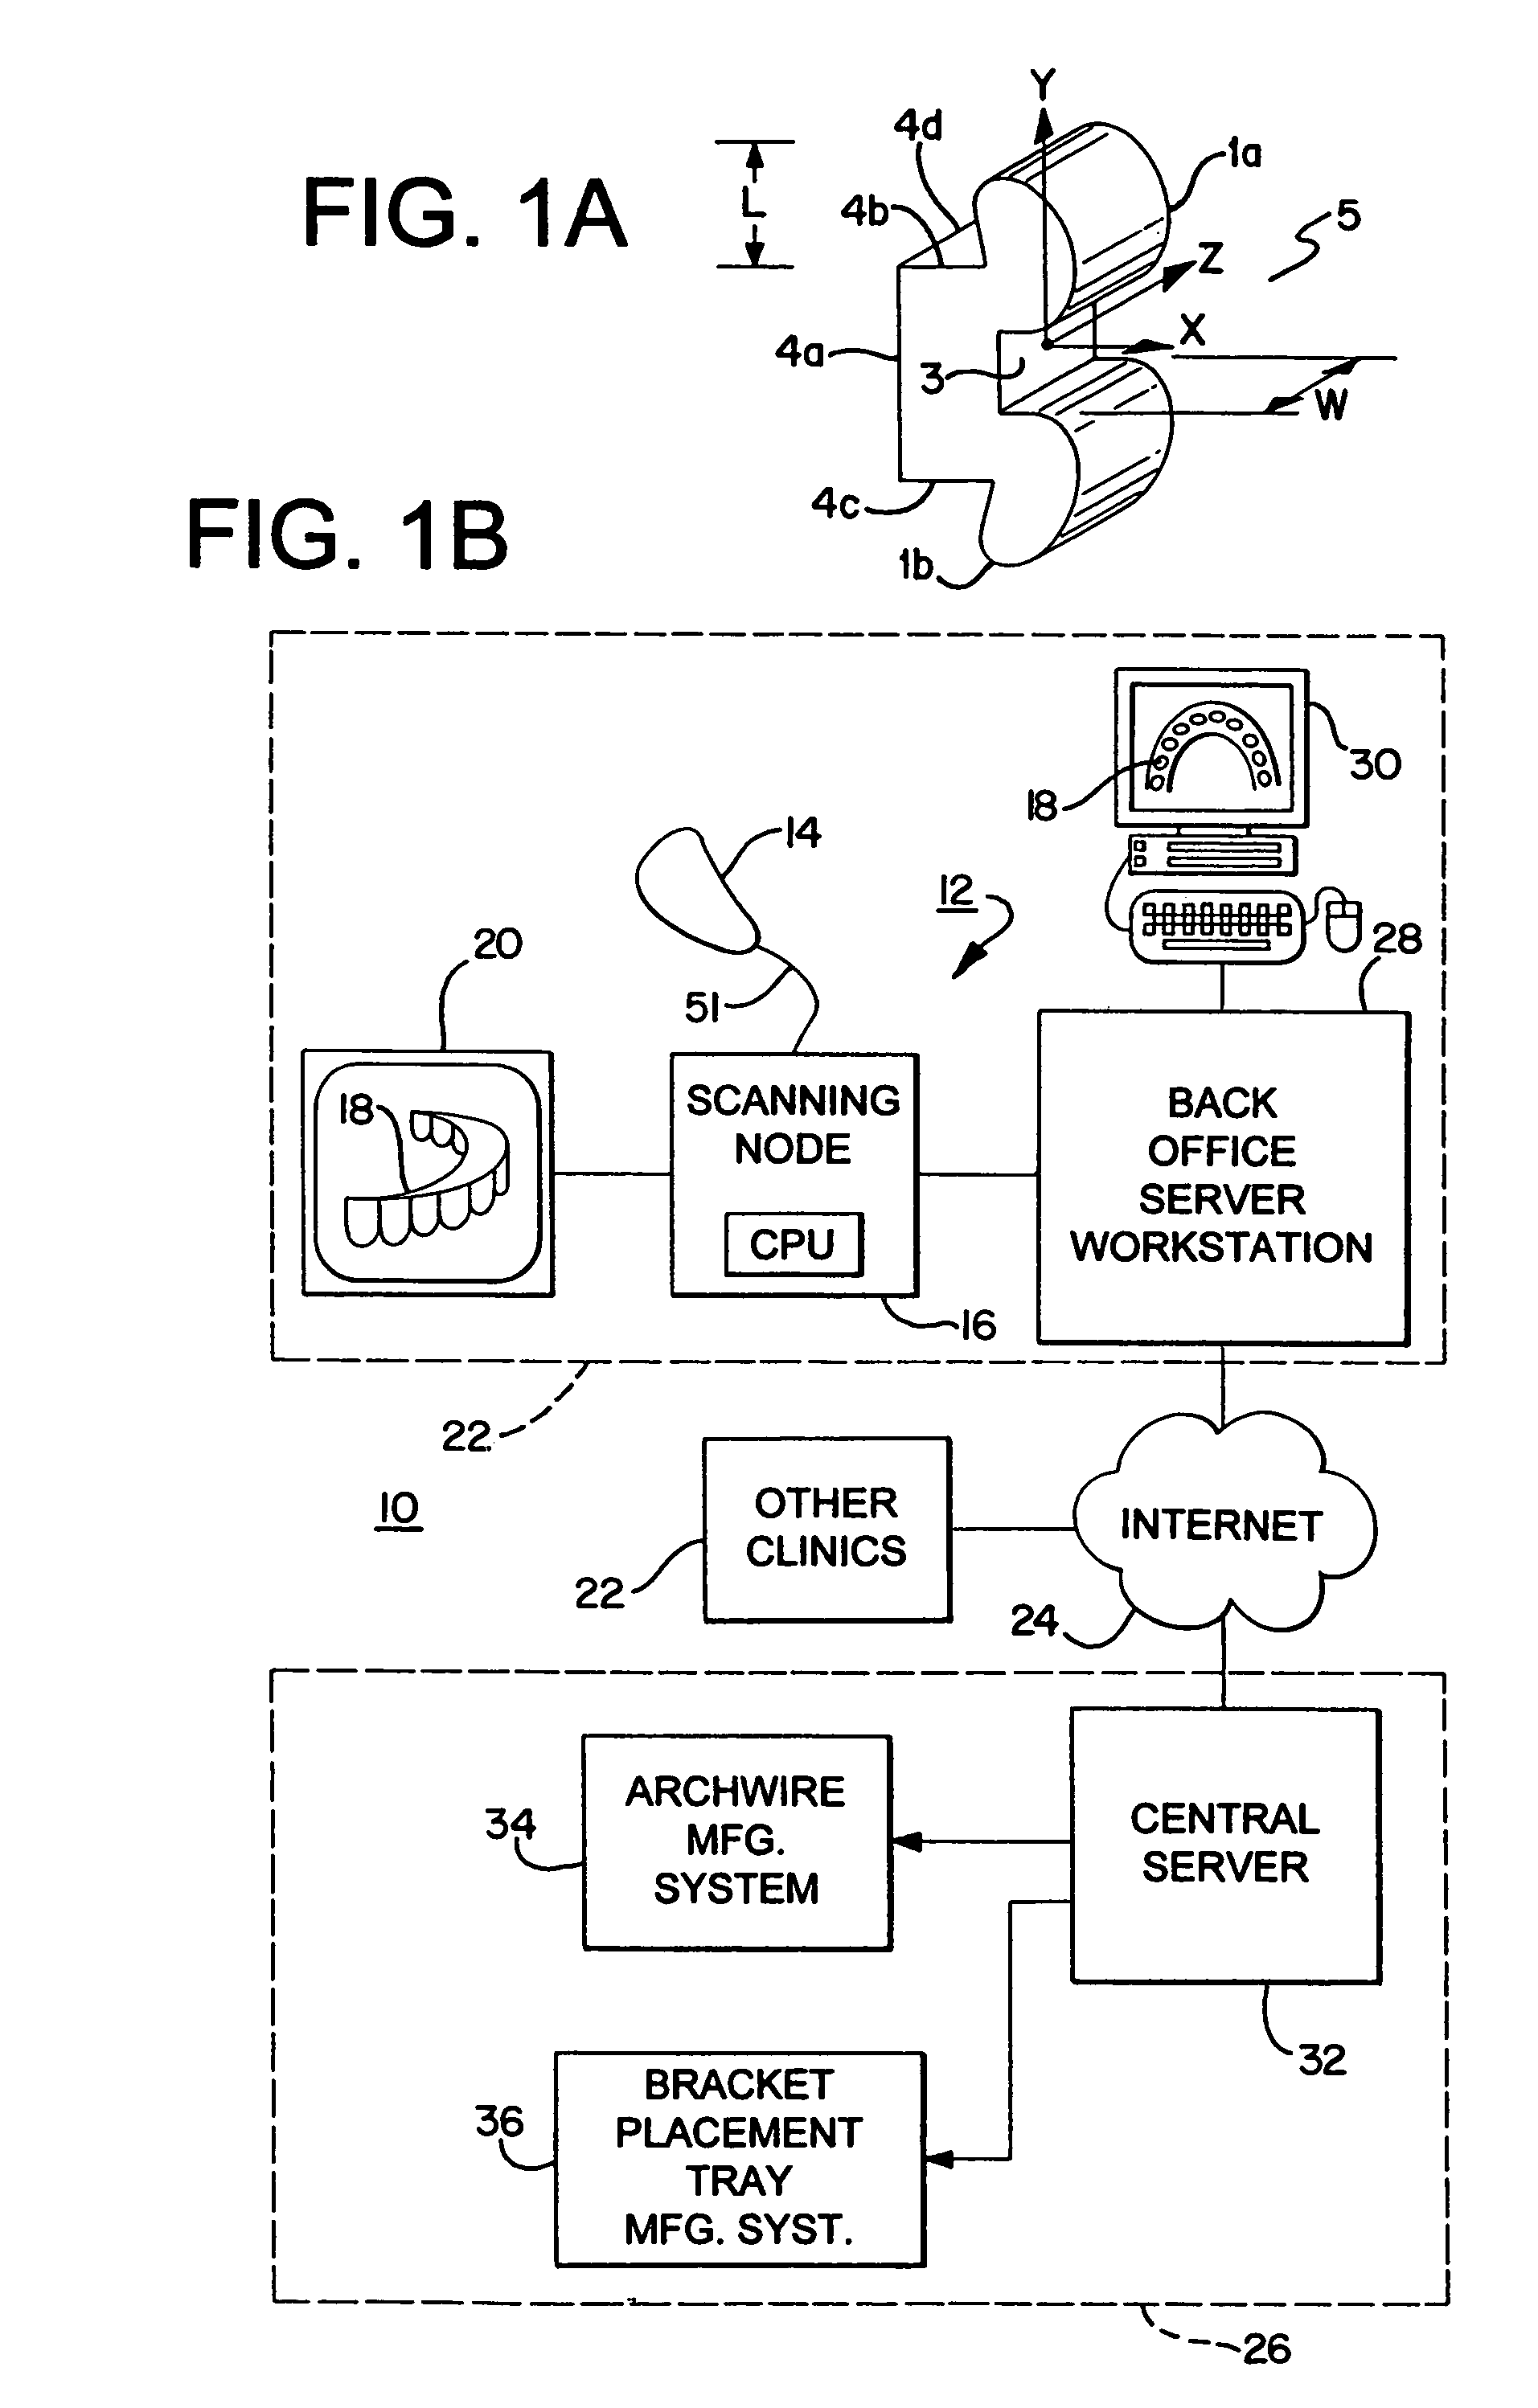 Method and apparatus for registering a known digital object to scanned 3-D model